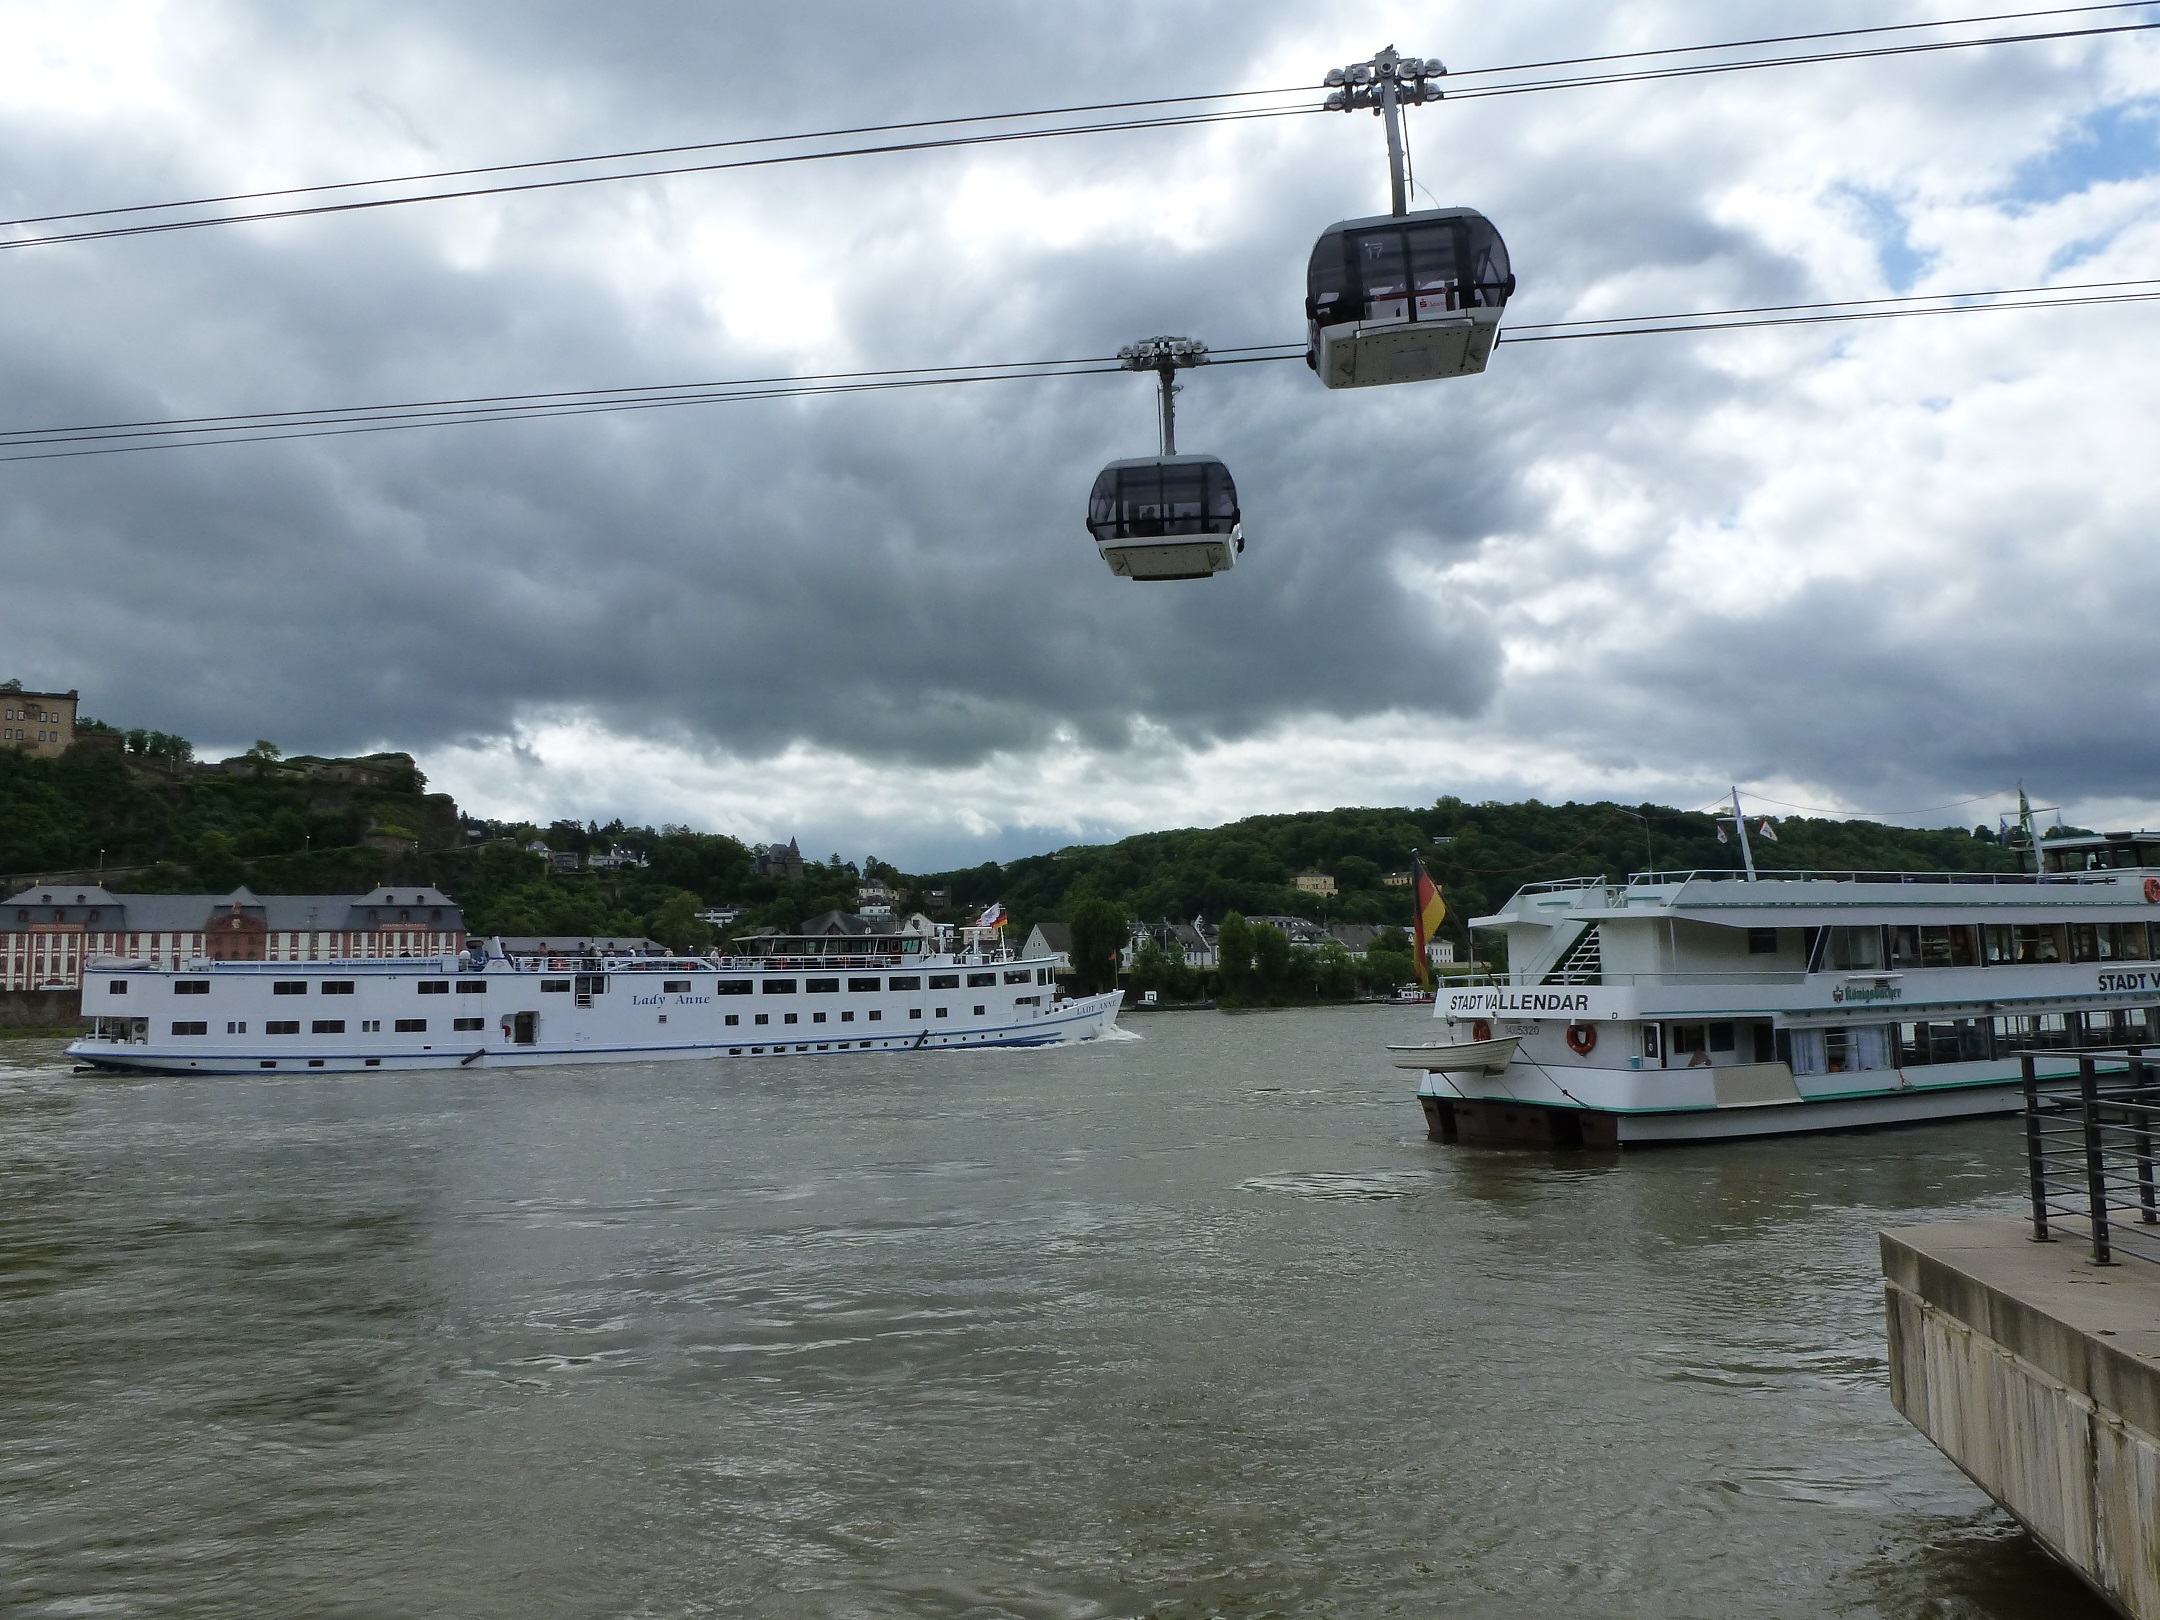 The busy Rhine at Koblenz.